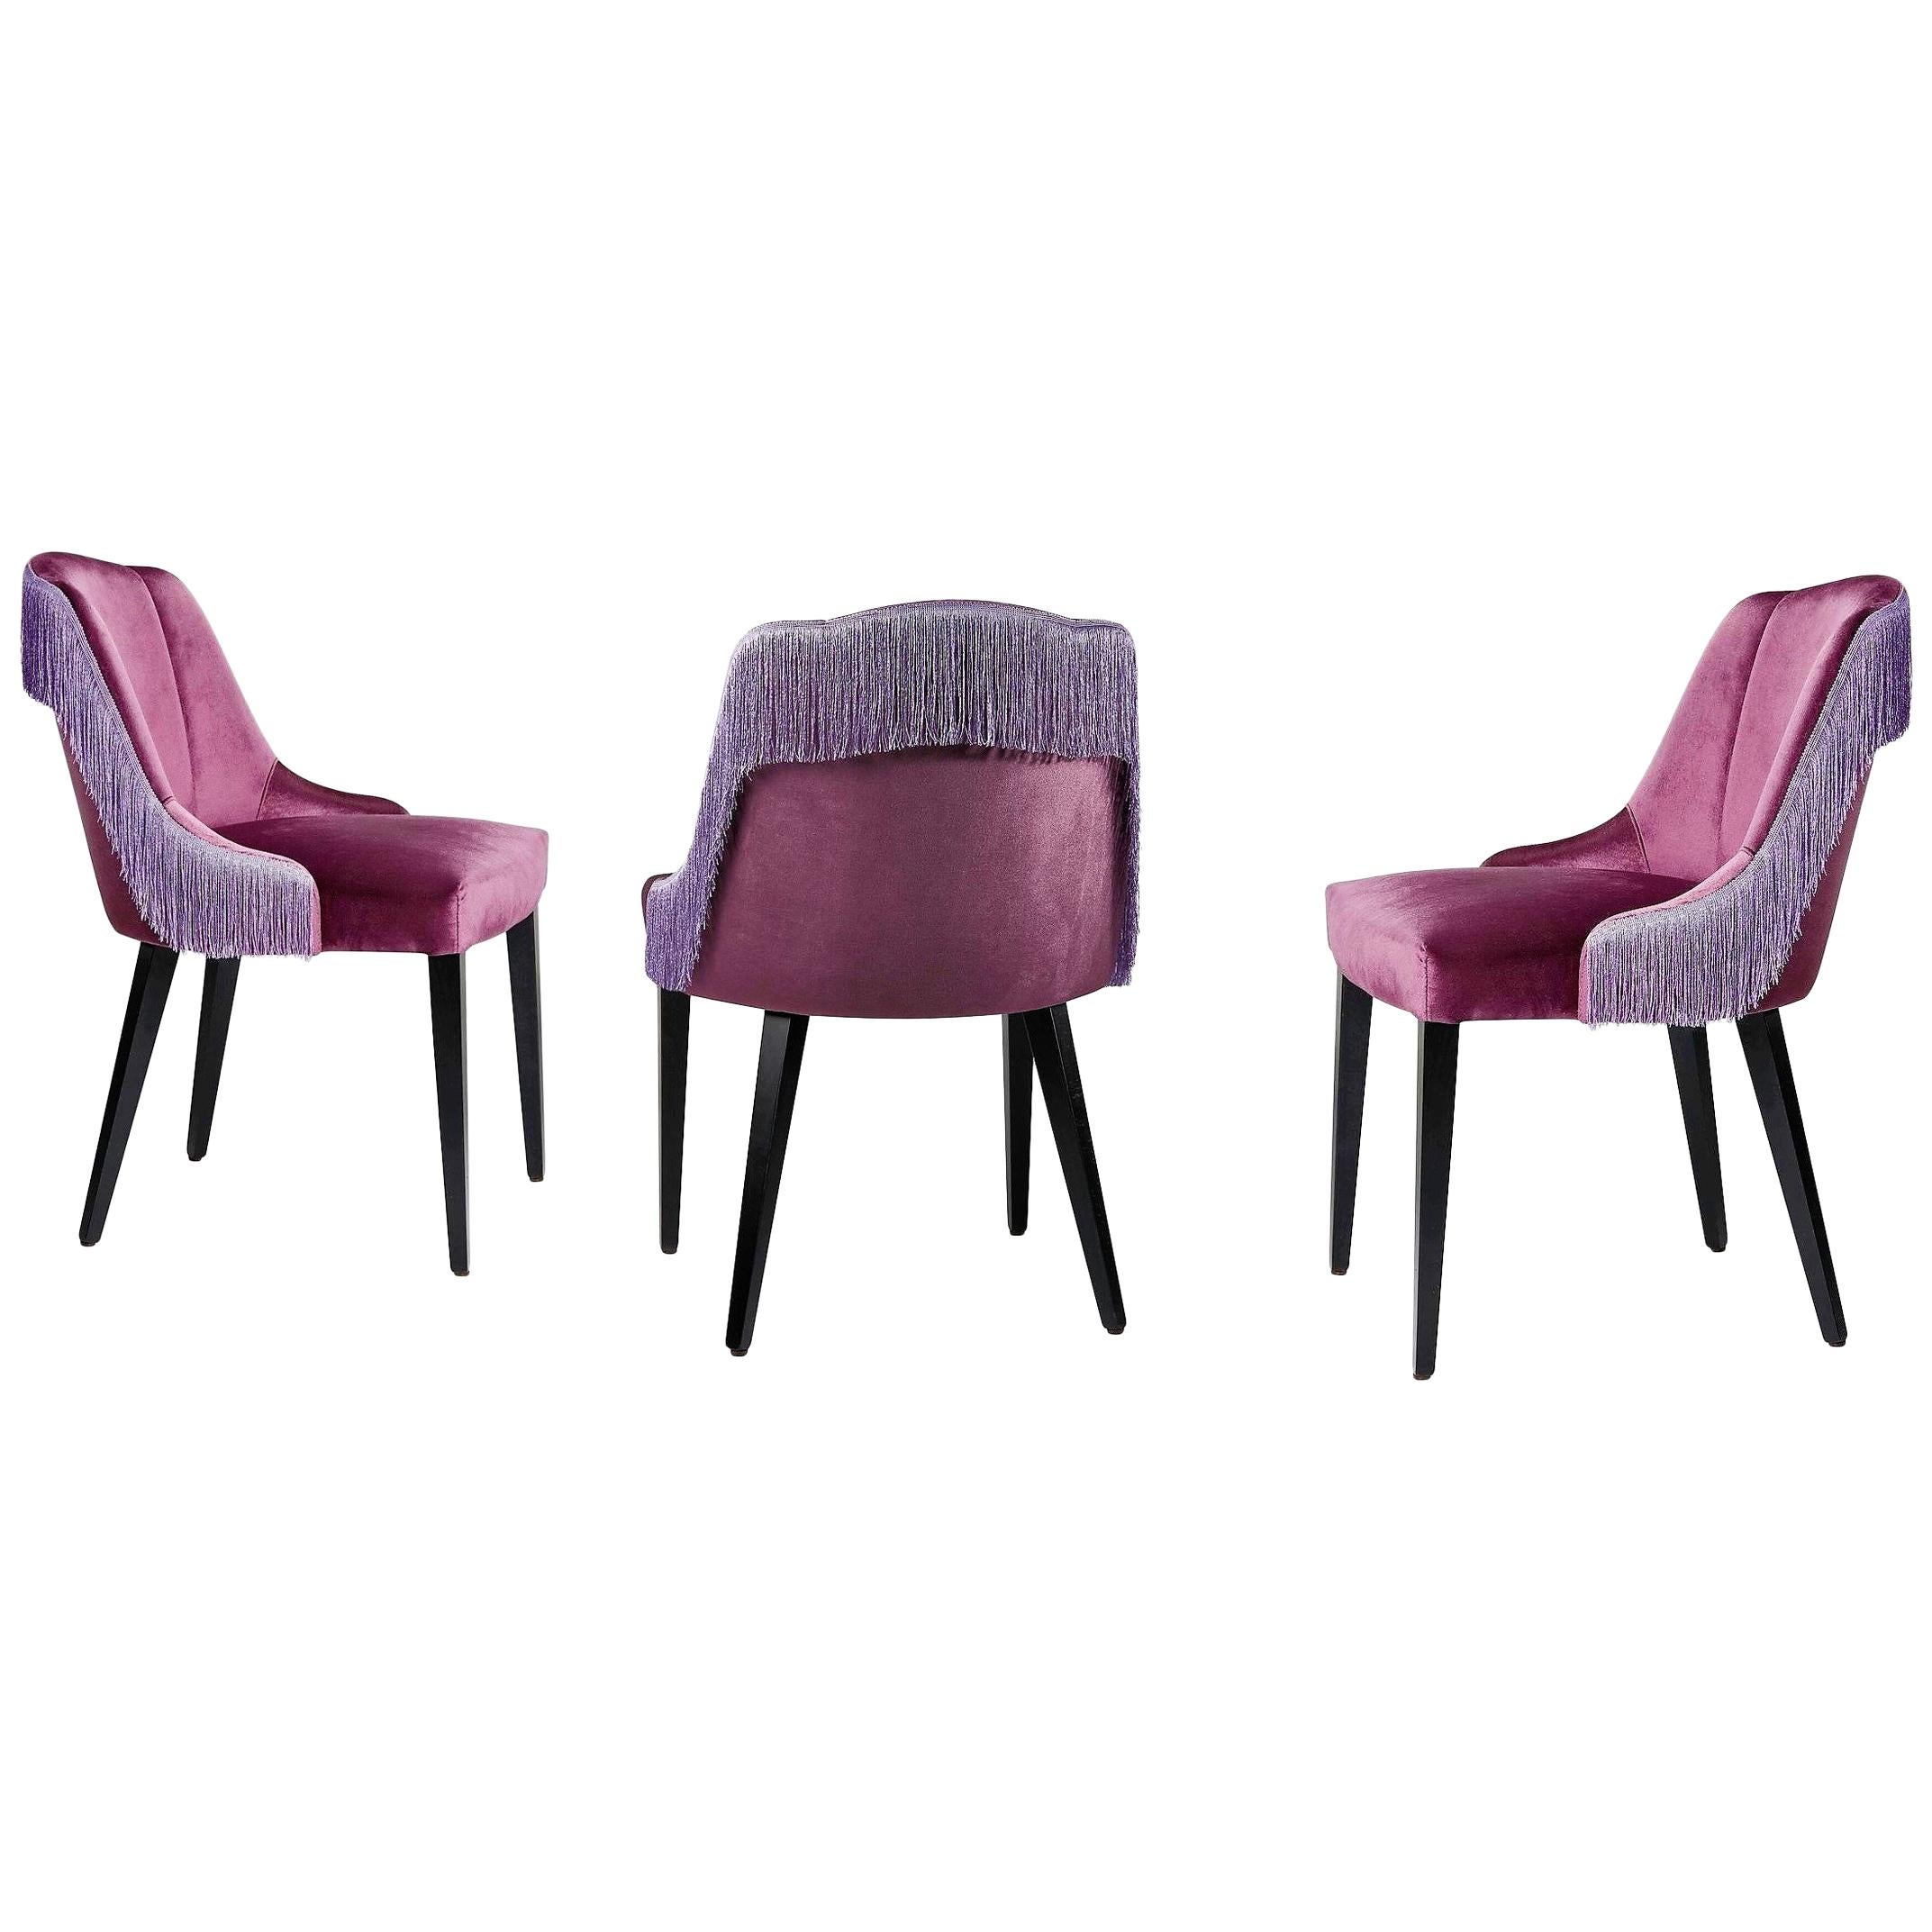 Set of 6 Contemporary Italian Upholstered Dining Chairs with Fringes